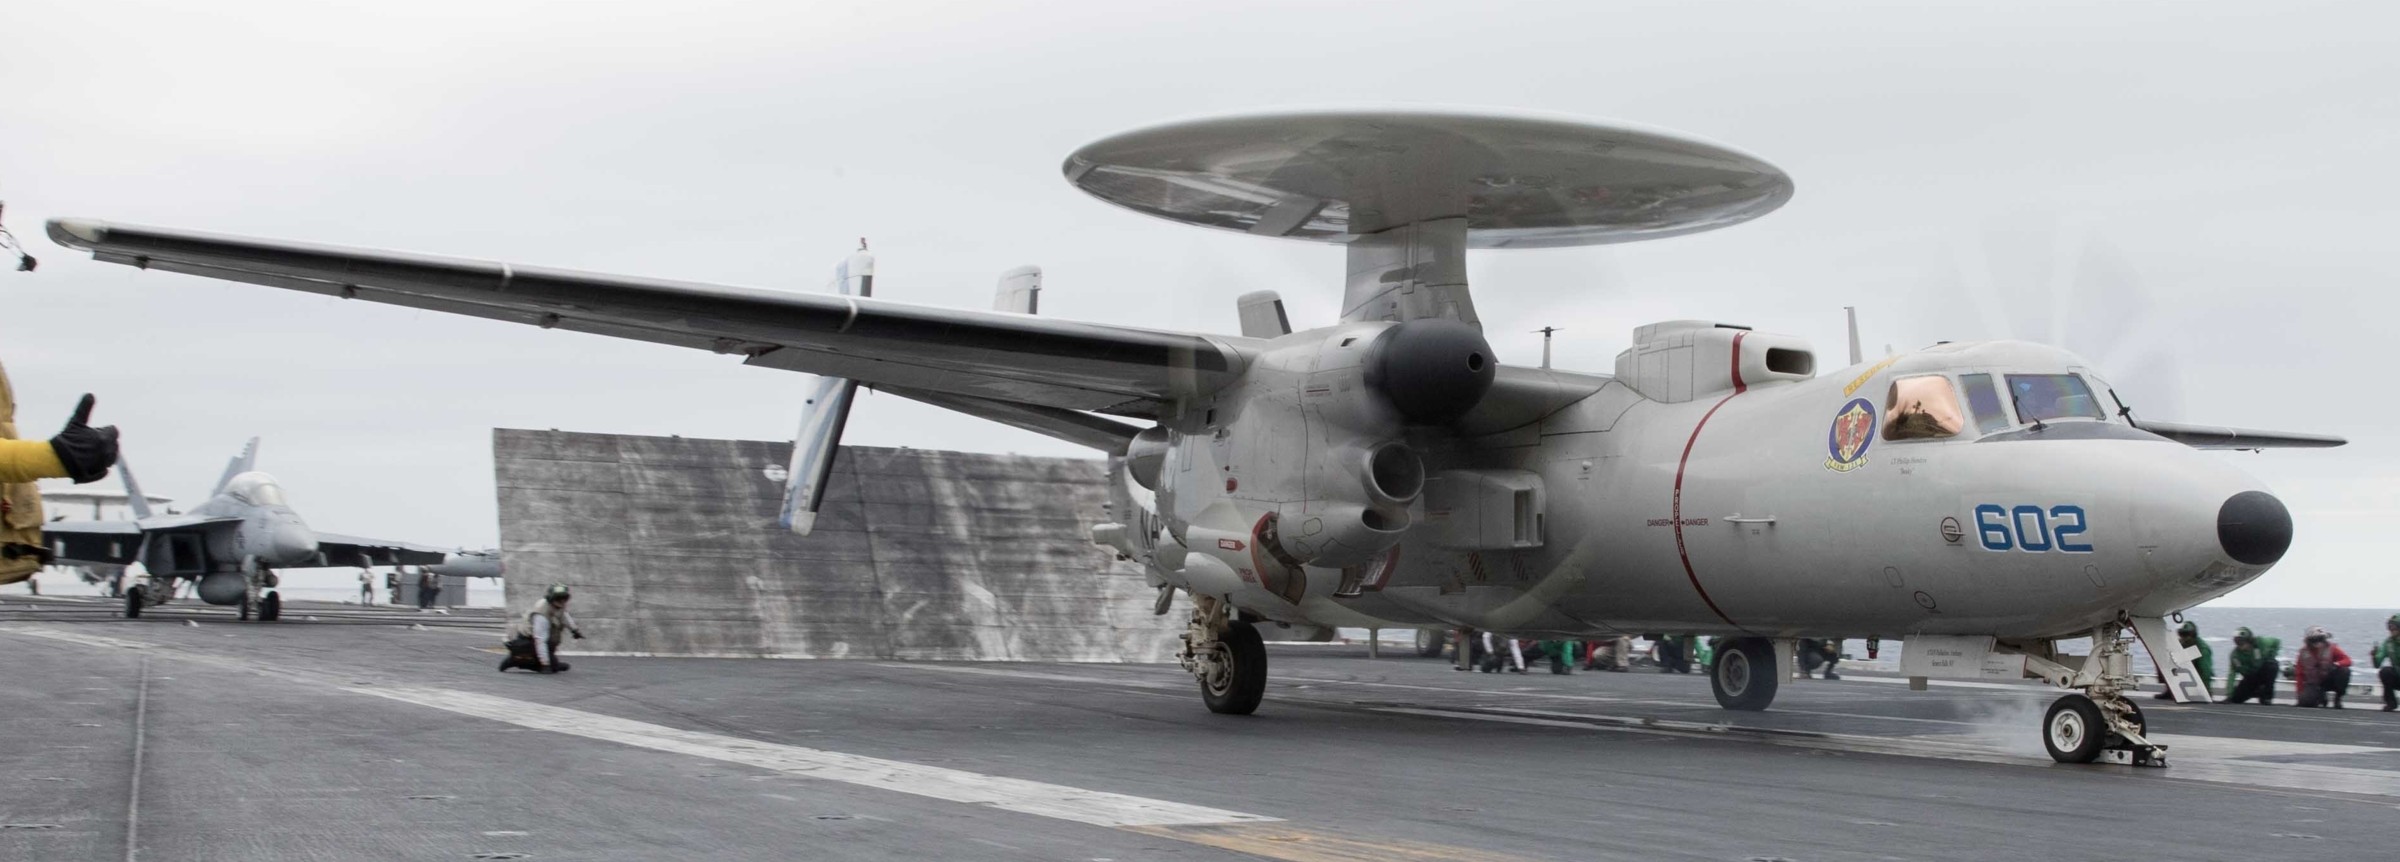 vaw-121 bluetails airborne command and control squadron us navy e-2d advanced hawkeye cvw-7 uss abraham lincoln cvn-72 64